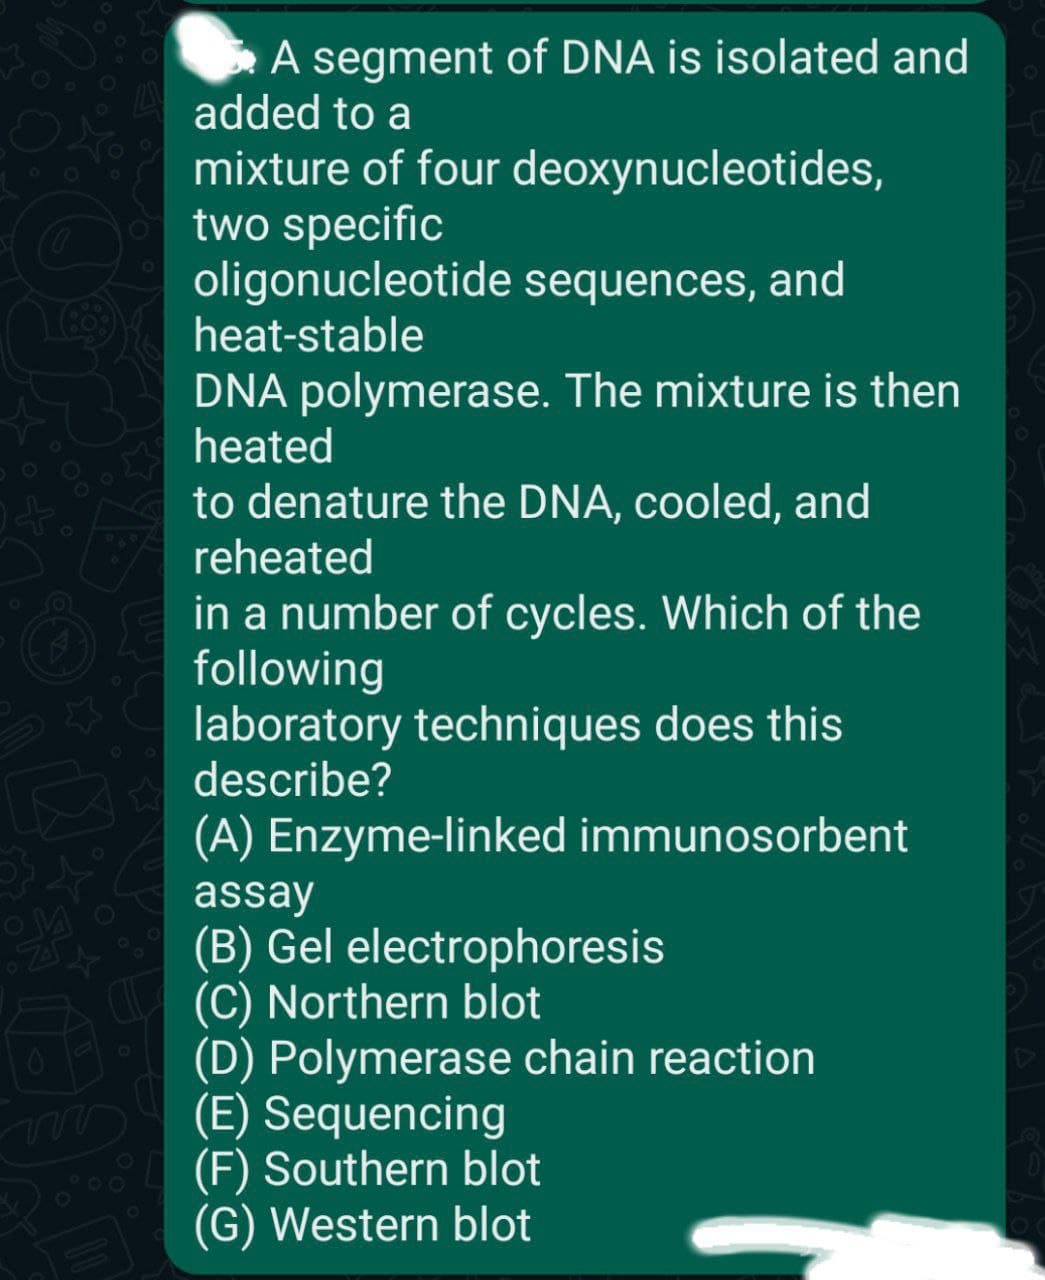 A segment of DNA is isolated and
added to a
mixture of four deoxynucleotides,
two specific
oligonucleotide sequences, and
heat-stable
DNA polymerase. The mixture is then
heated
to denature the DNA, cooled, and
reheated
in a number of cycles. Which of the
following
laboratory techniques does this
describe?
(A) Enzyme-linked immunosorbent
assay
(B) Gel electrophoresis
(C) Northern blot
(D) Polymerase chain reaction
(E) Sequencing
(F) Southern blot
(G) Western blot
